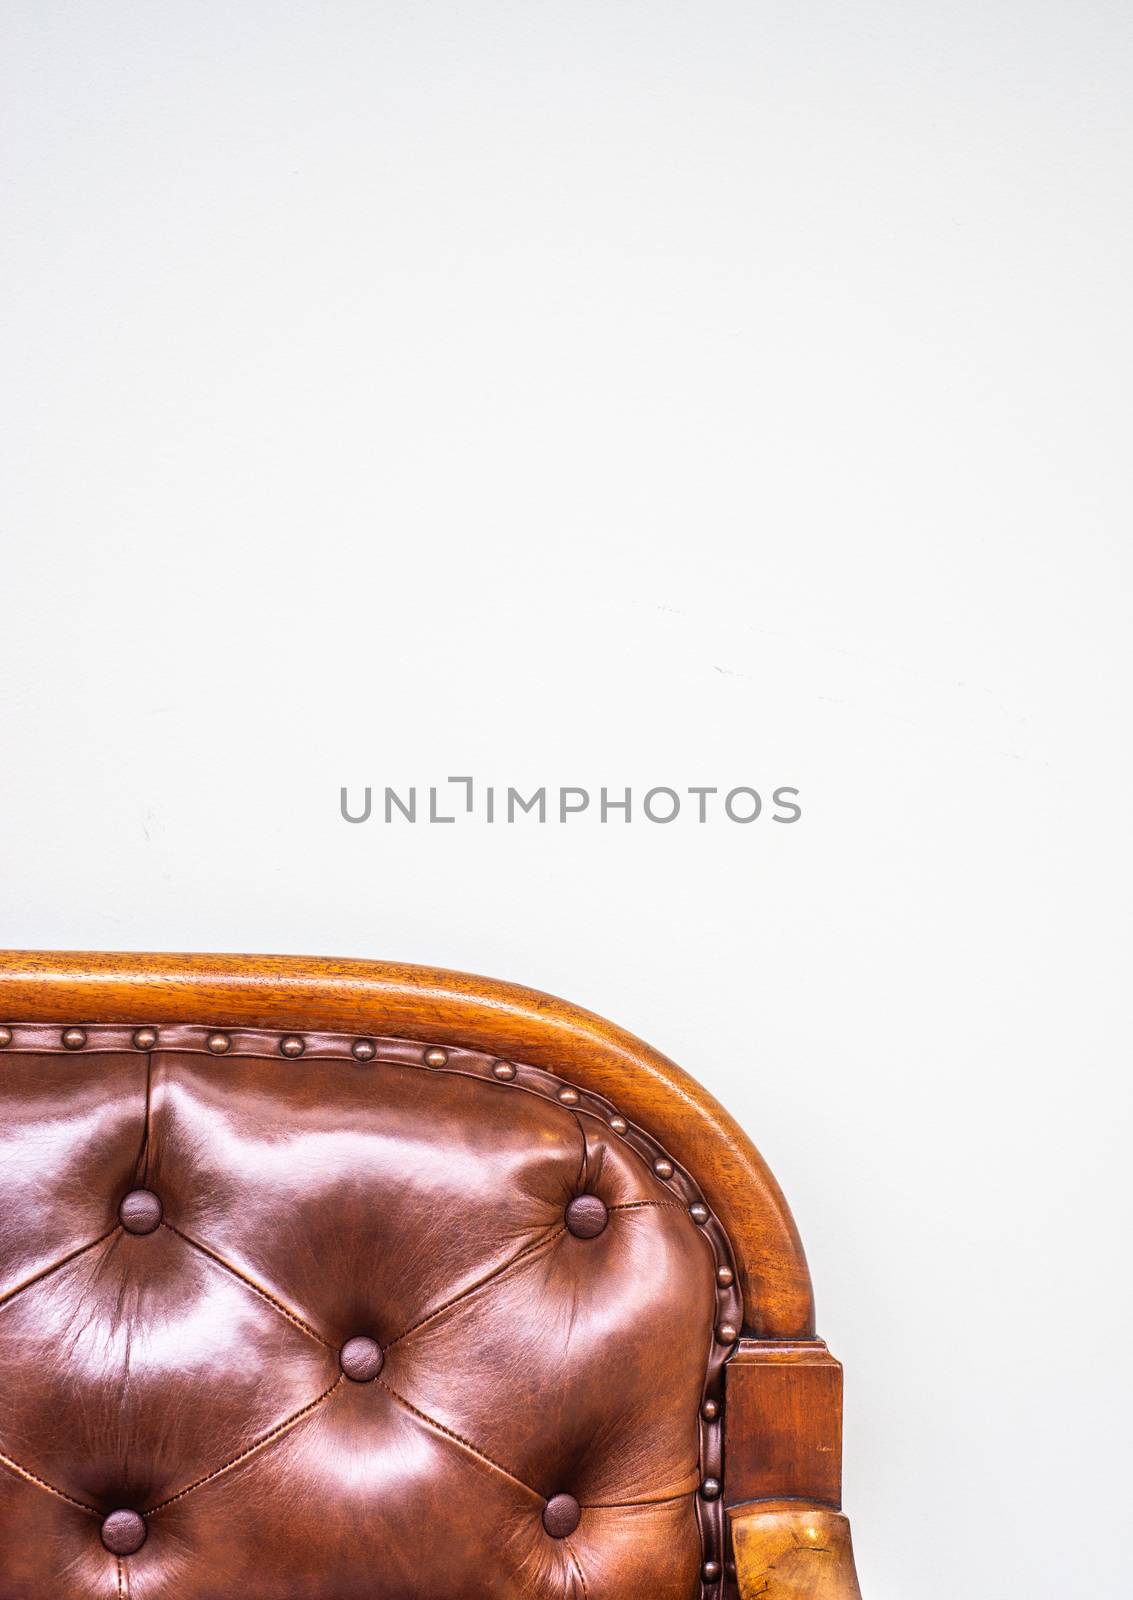 Detail Of Retro Vintage Antique Luxury Furniture Against A Plain Wall With Copy Space